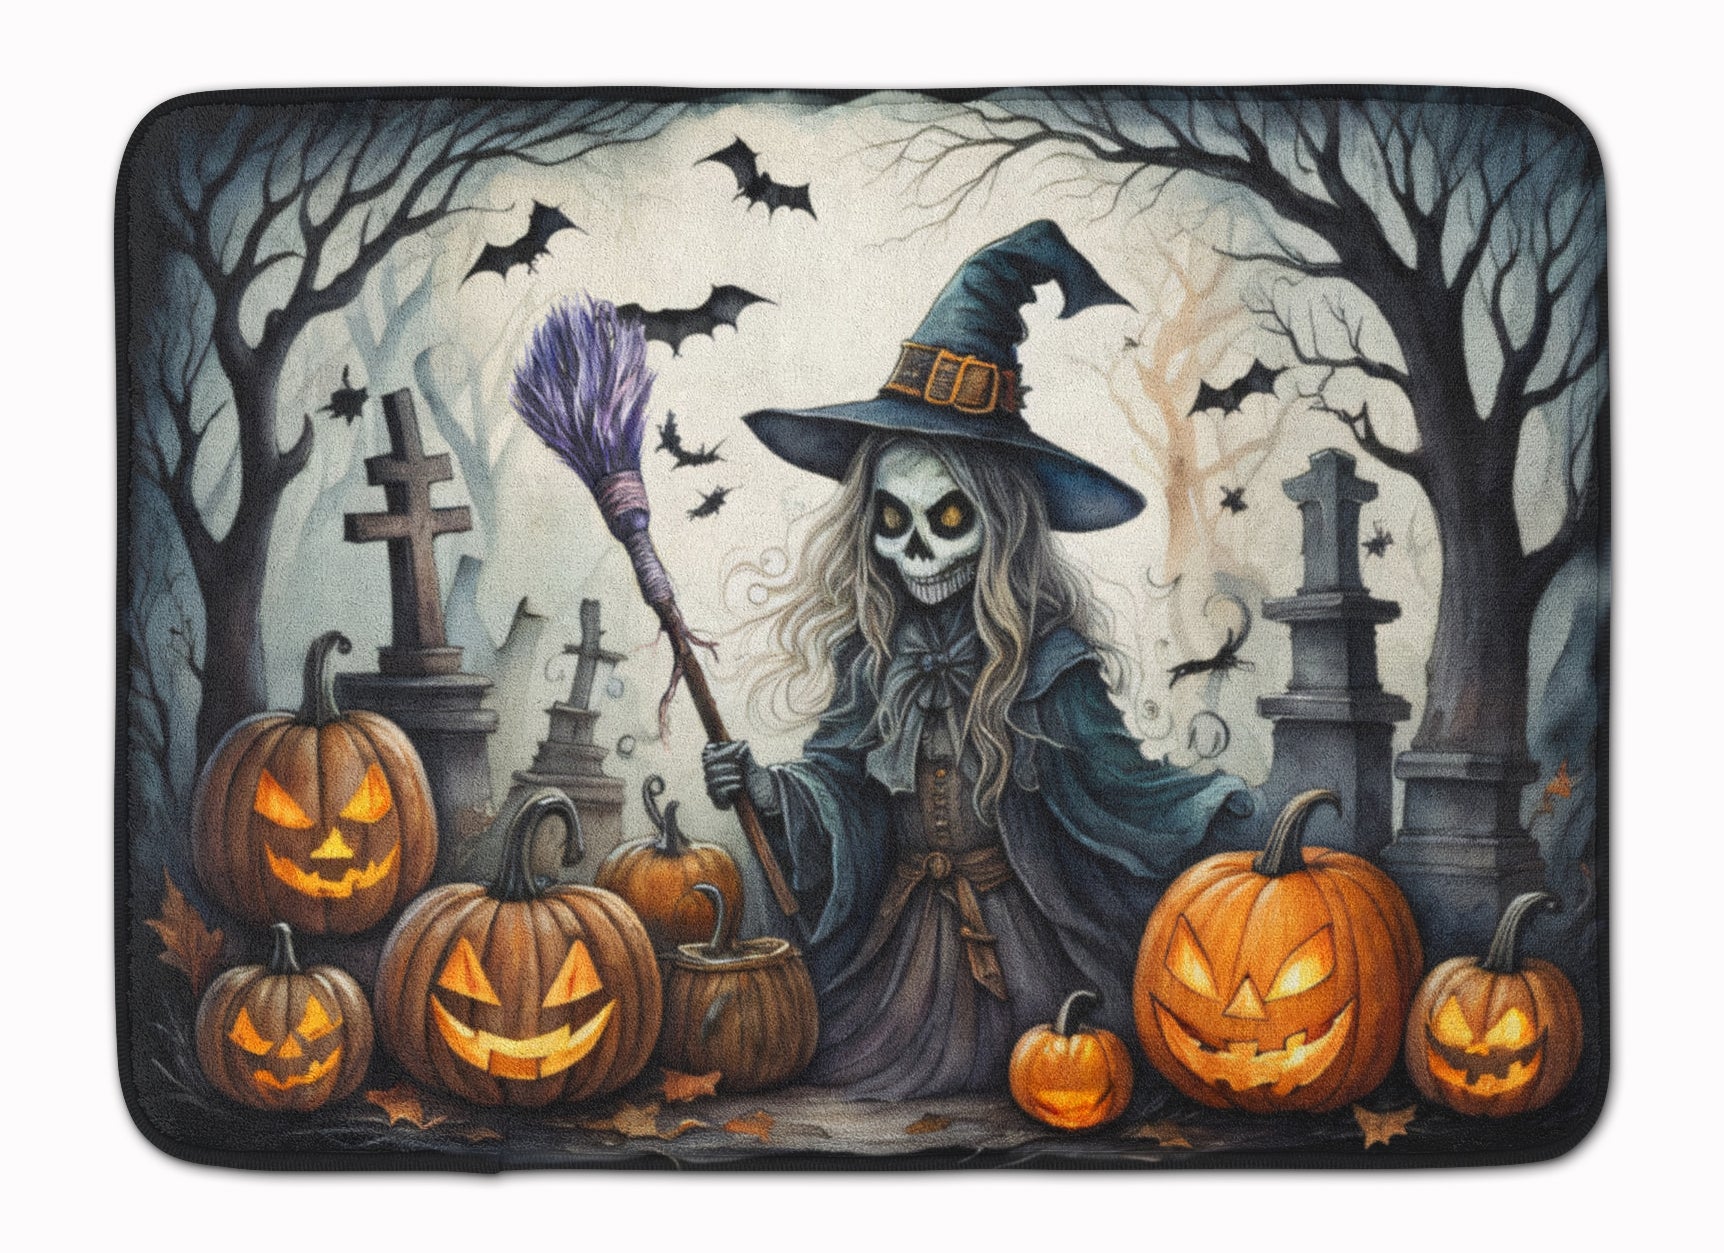 Buy this Witch Spooky Halloween Memory Foam Kitchen Mat